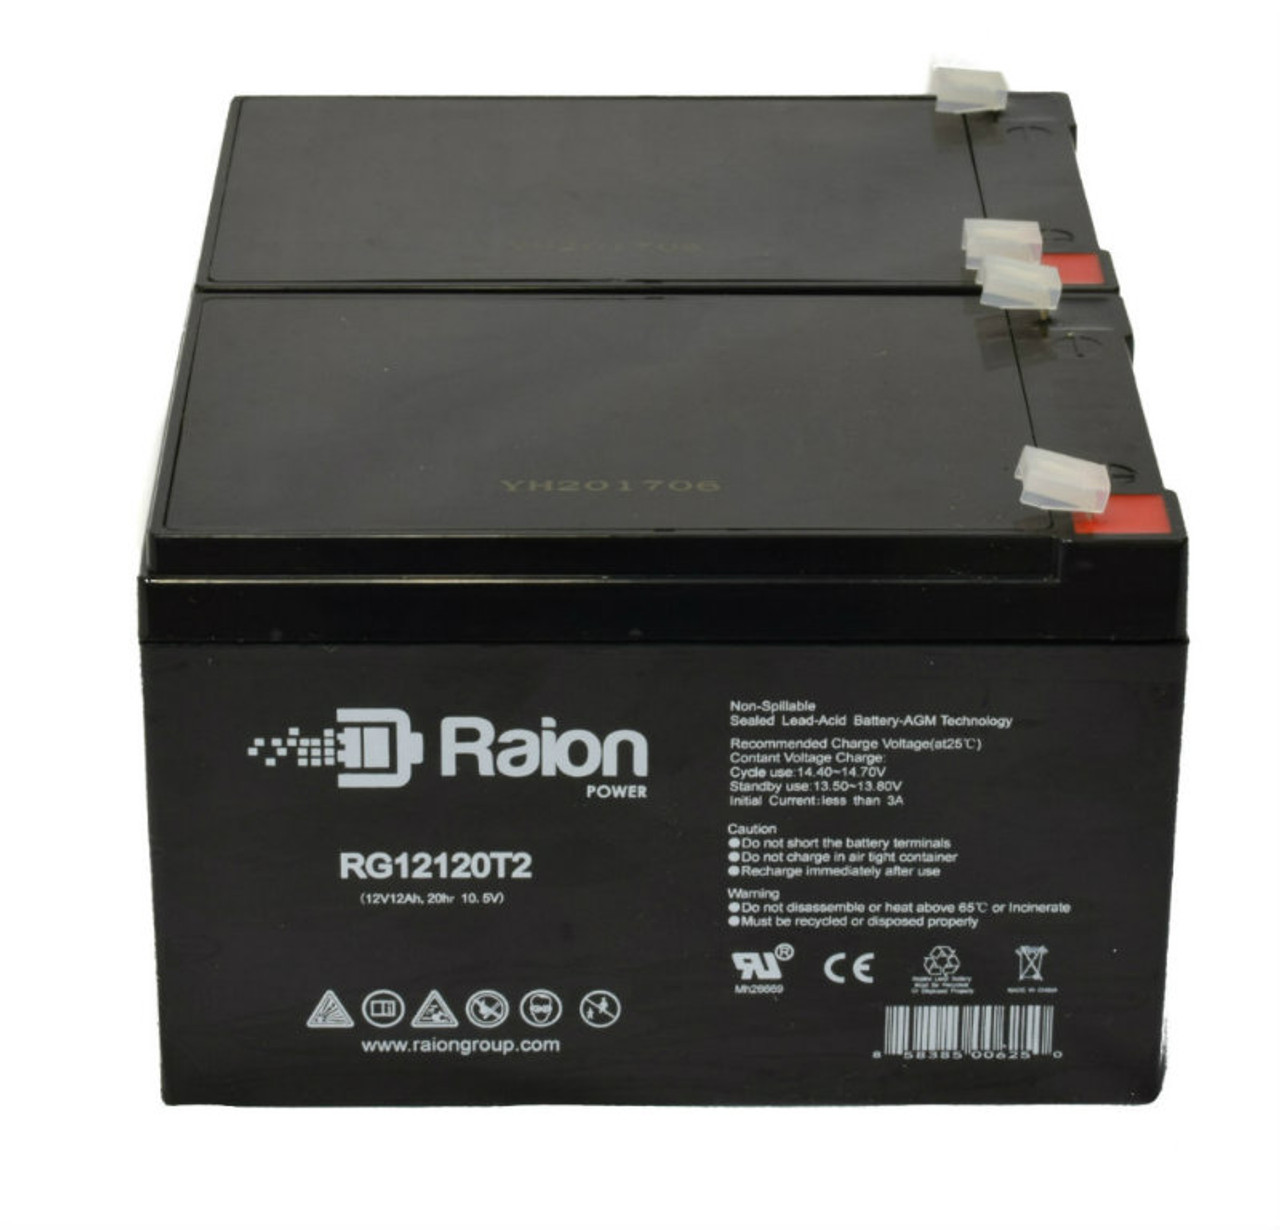 Raion Power RG12120T2 12V 12Ah Replacement Medical Equipment Battery for Invacare 220 Scooter - 2 Pack